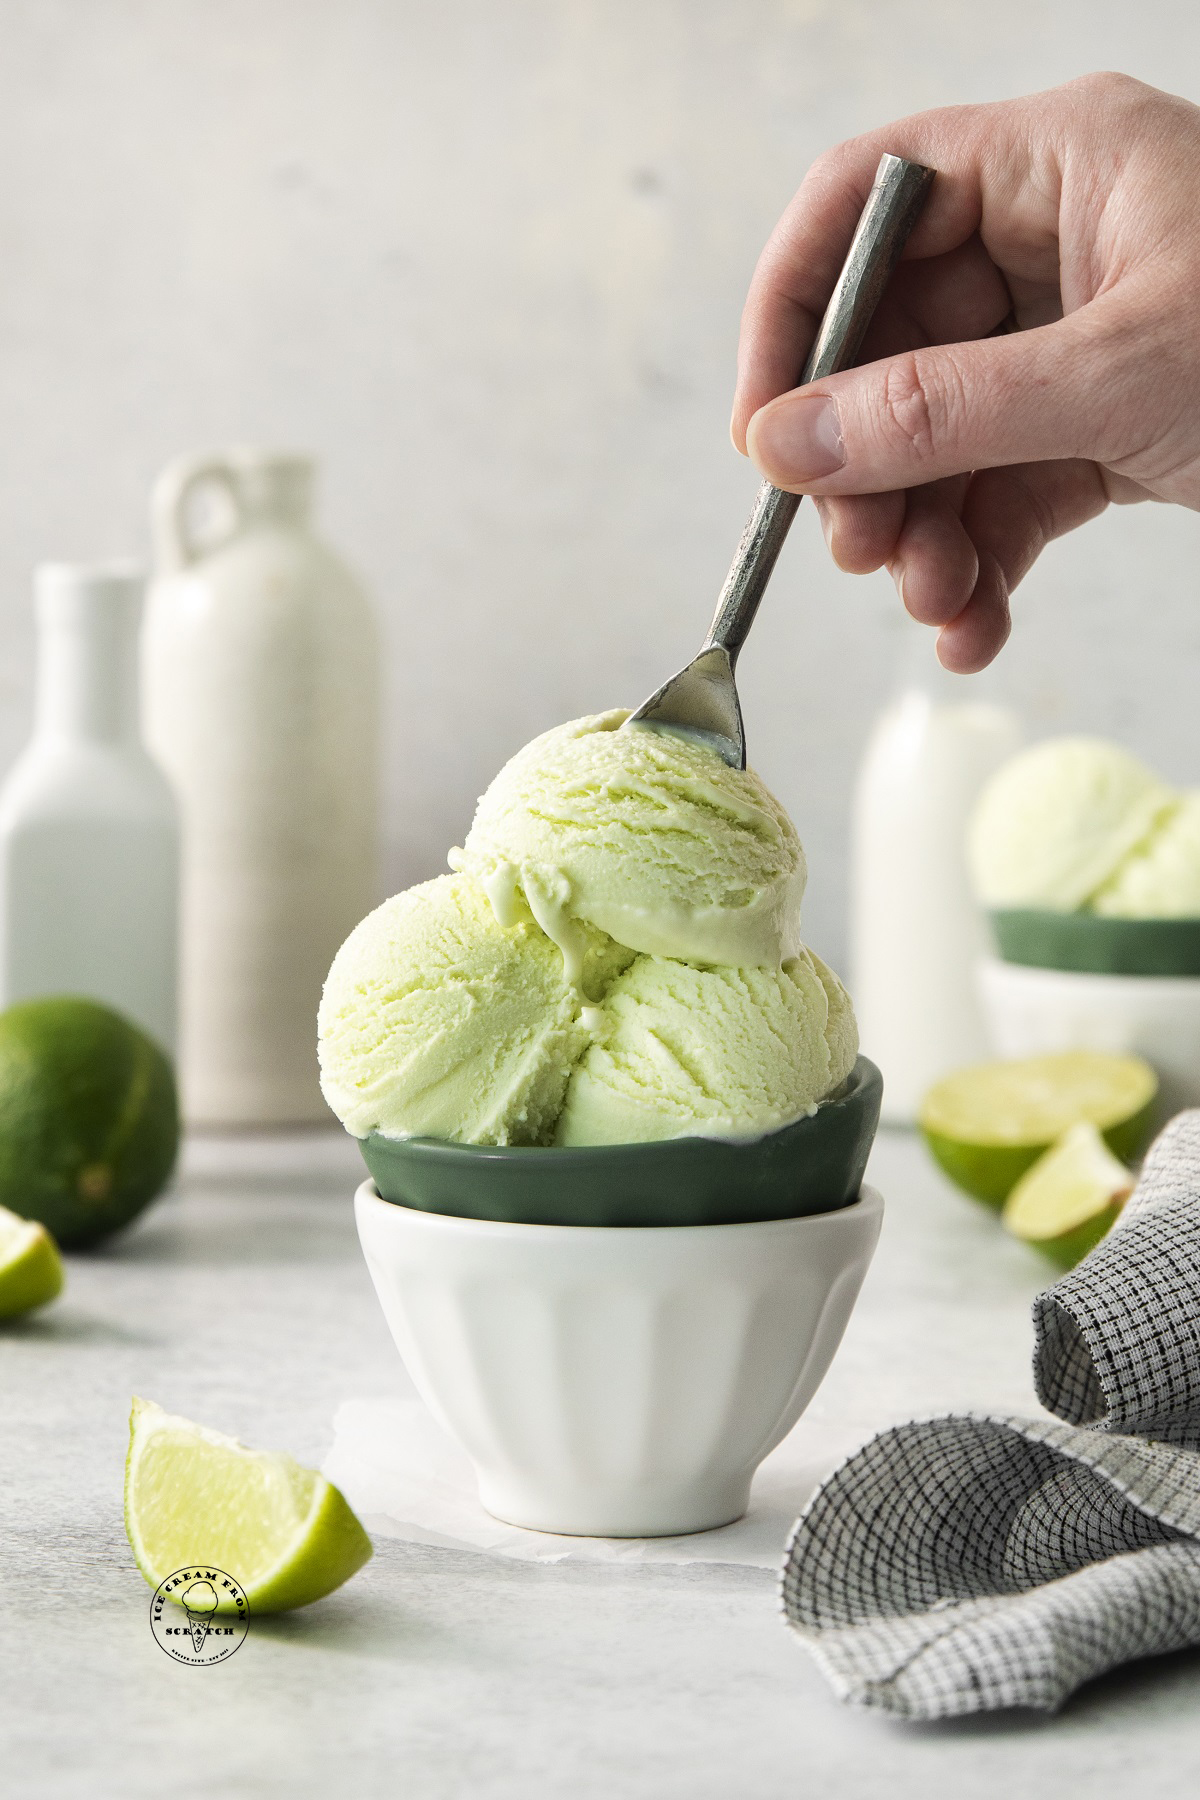 a hand using a spoon to eat a bowl of homemade lime ice cream.